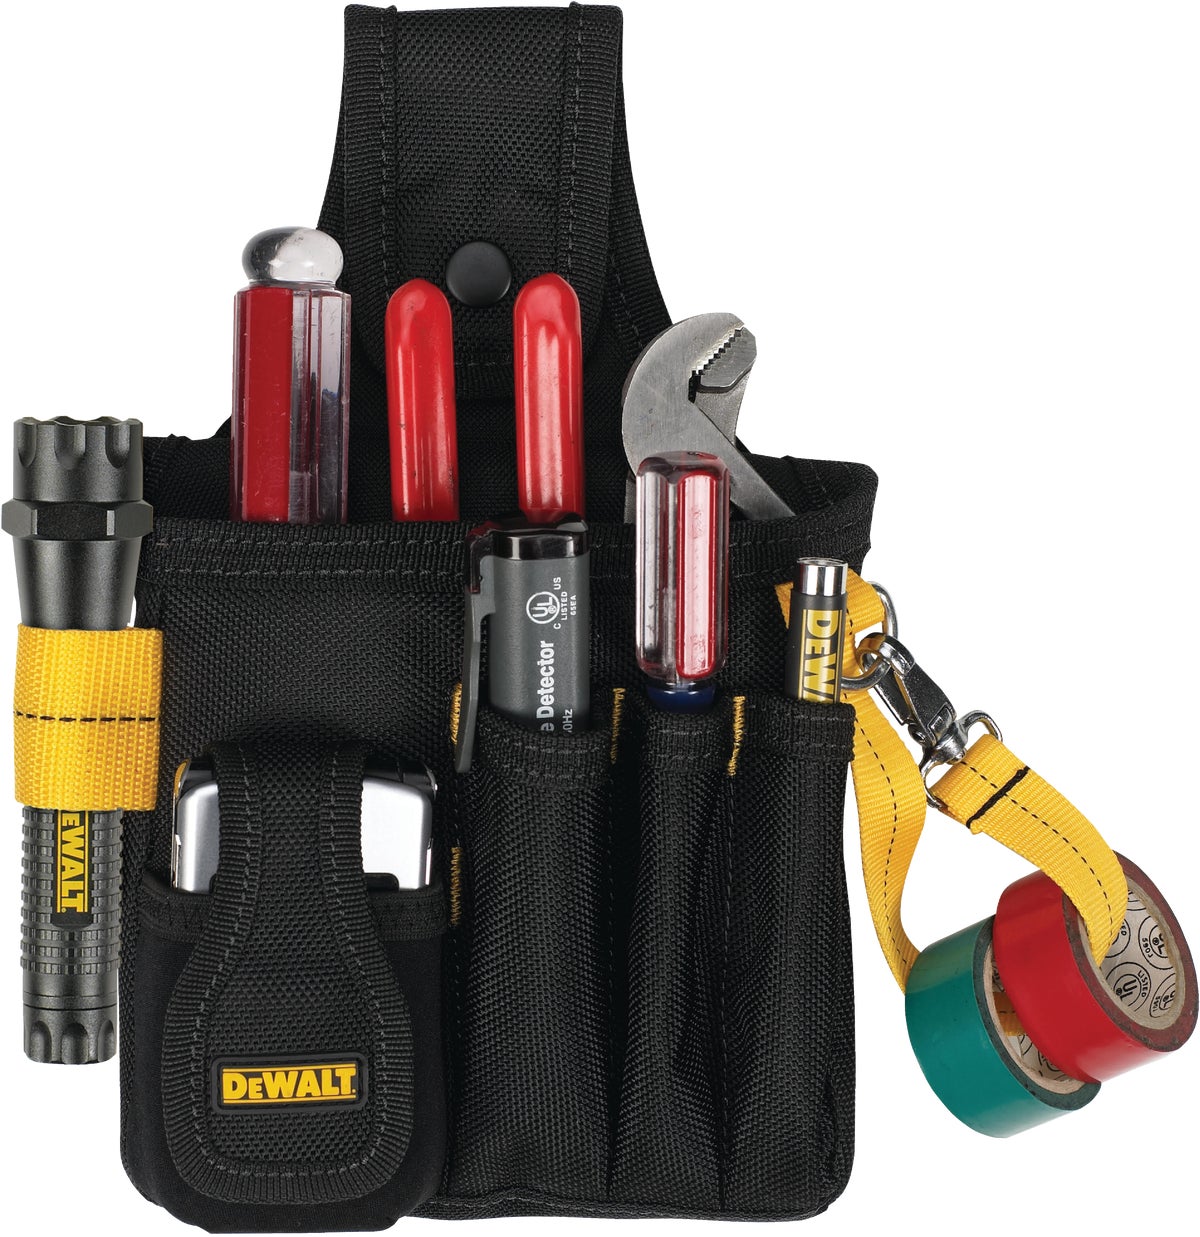 Custom Leathercraft DEWALT DG5103 Small Durable Maintenance and Electrician's Pouch with Pockets for Tools, Flashlight, Keys, Black - 3